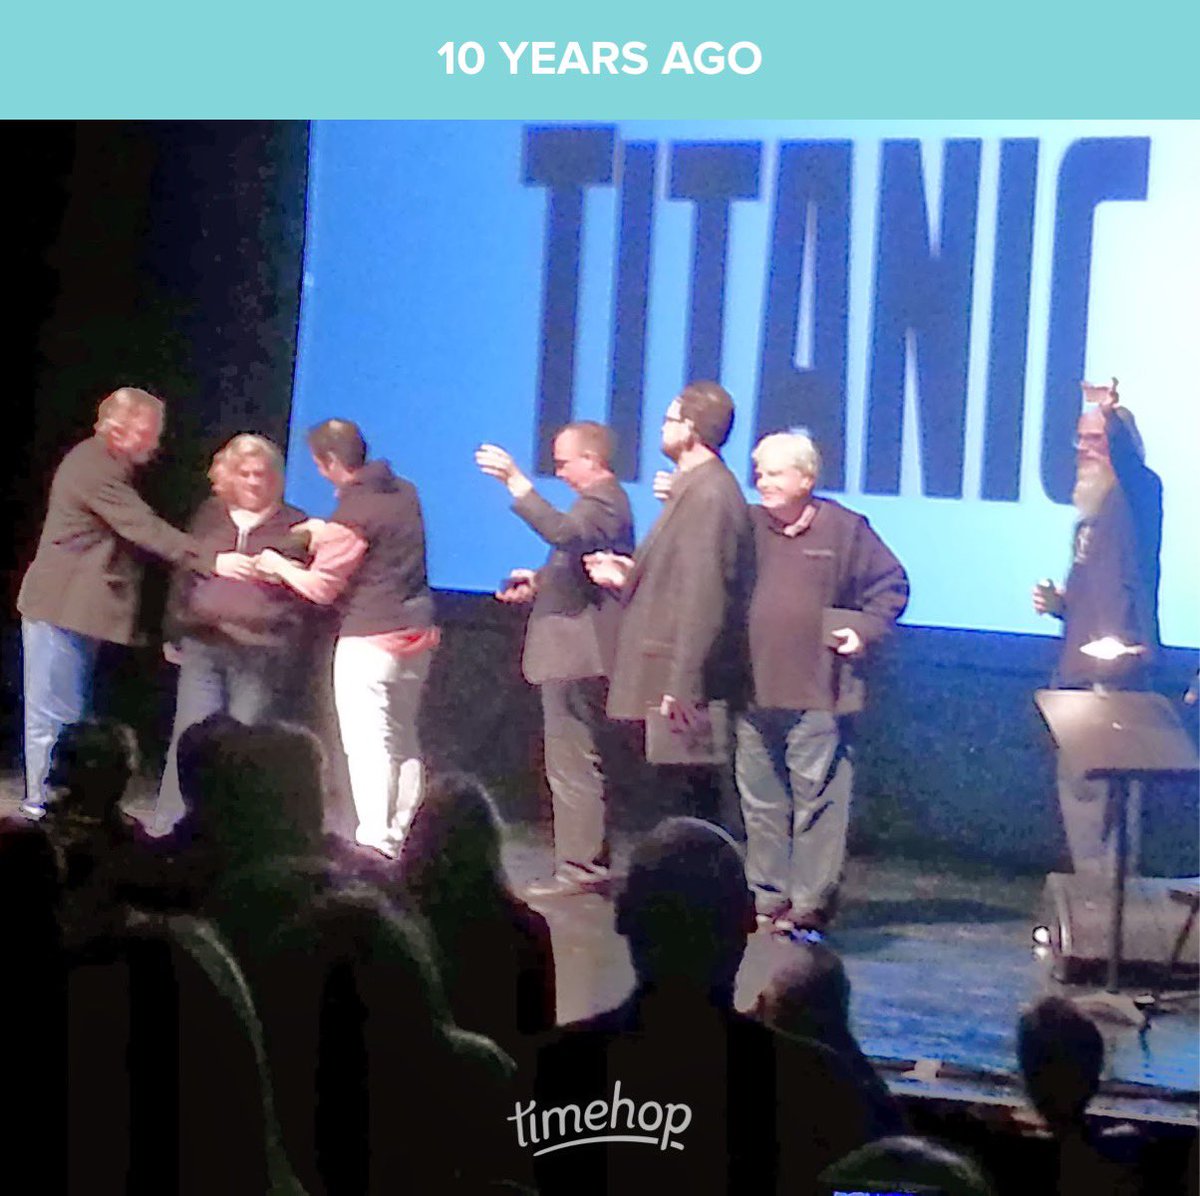 Hard to believe it's been 10 years since Cinematic Titanic made its final voyage. It was a fun ride,& everyone involved should still be proud of the amazing work they did! Thanks @FrankConniff @TraceBeaulieu Mary Jo Pehl @JoelGHodgson @JElvisWeinstein & Gruber! @CinematicTitans